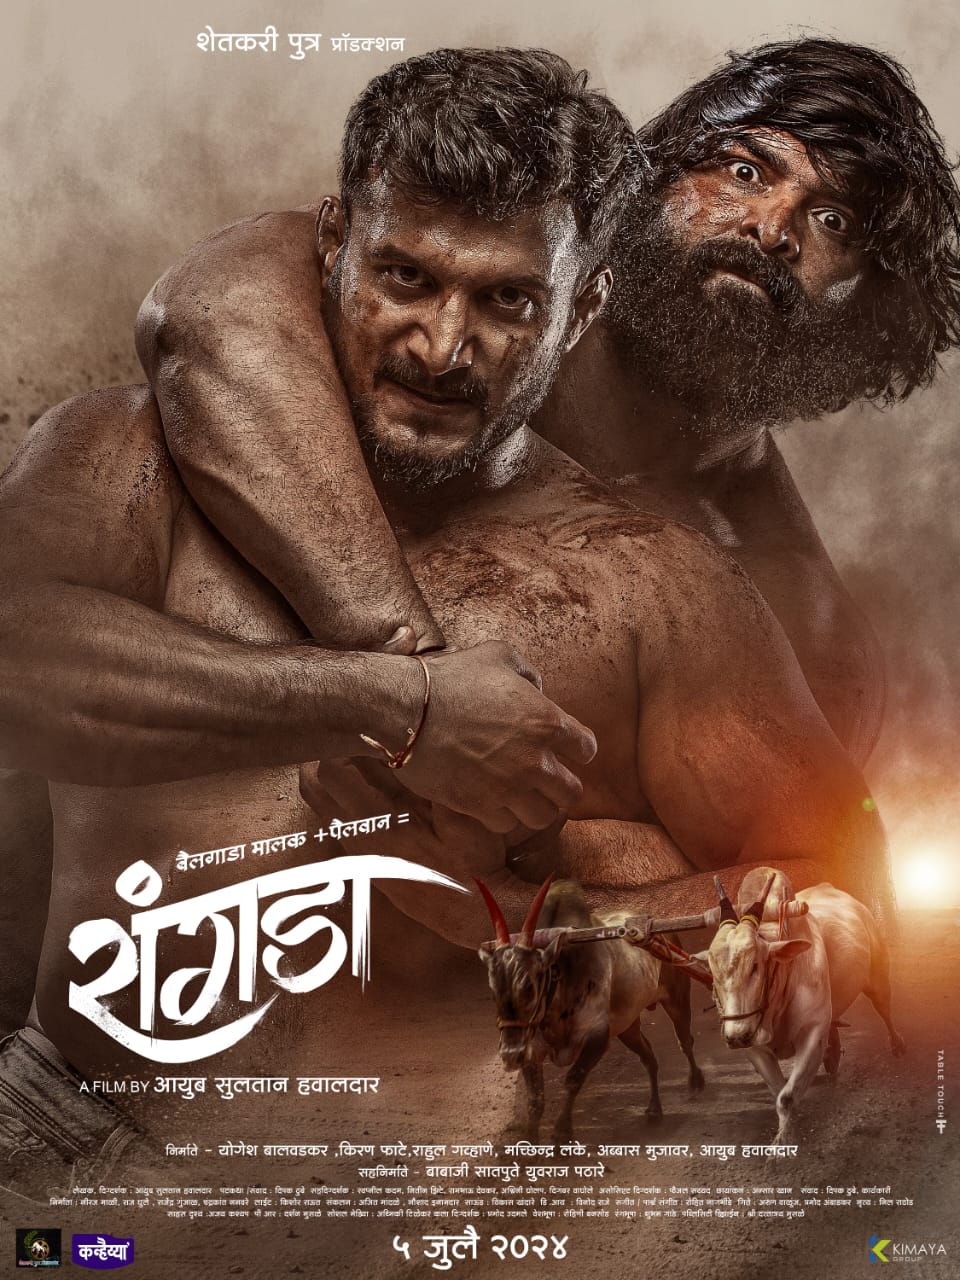 A genuine Rangda experience in the soil of Maharashtra Movie poster launched on social media